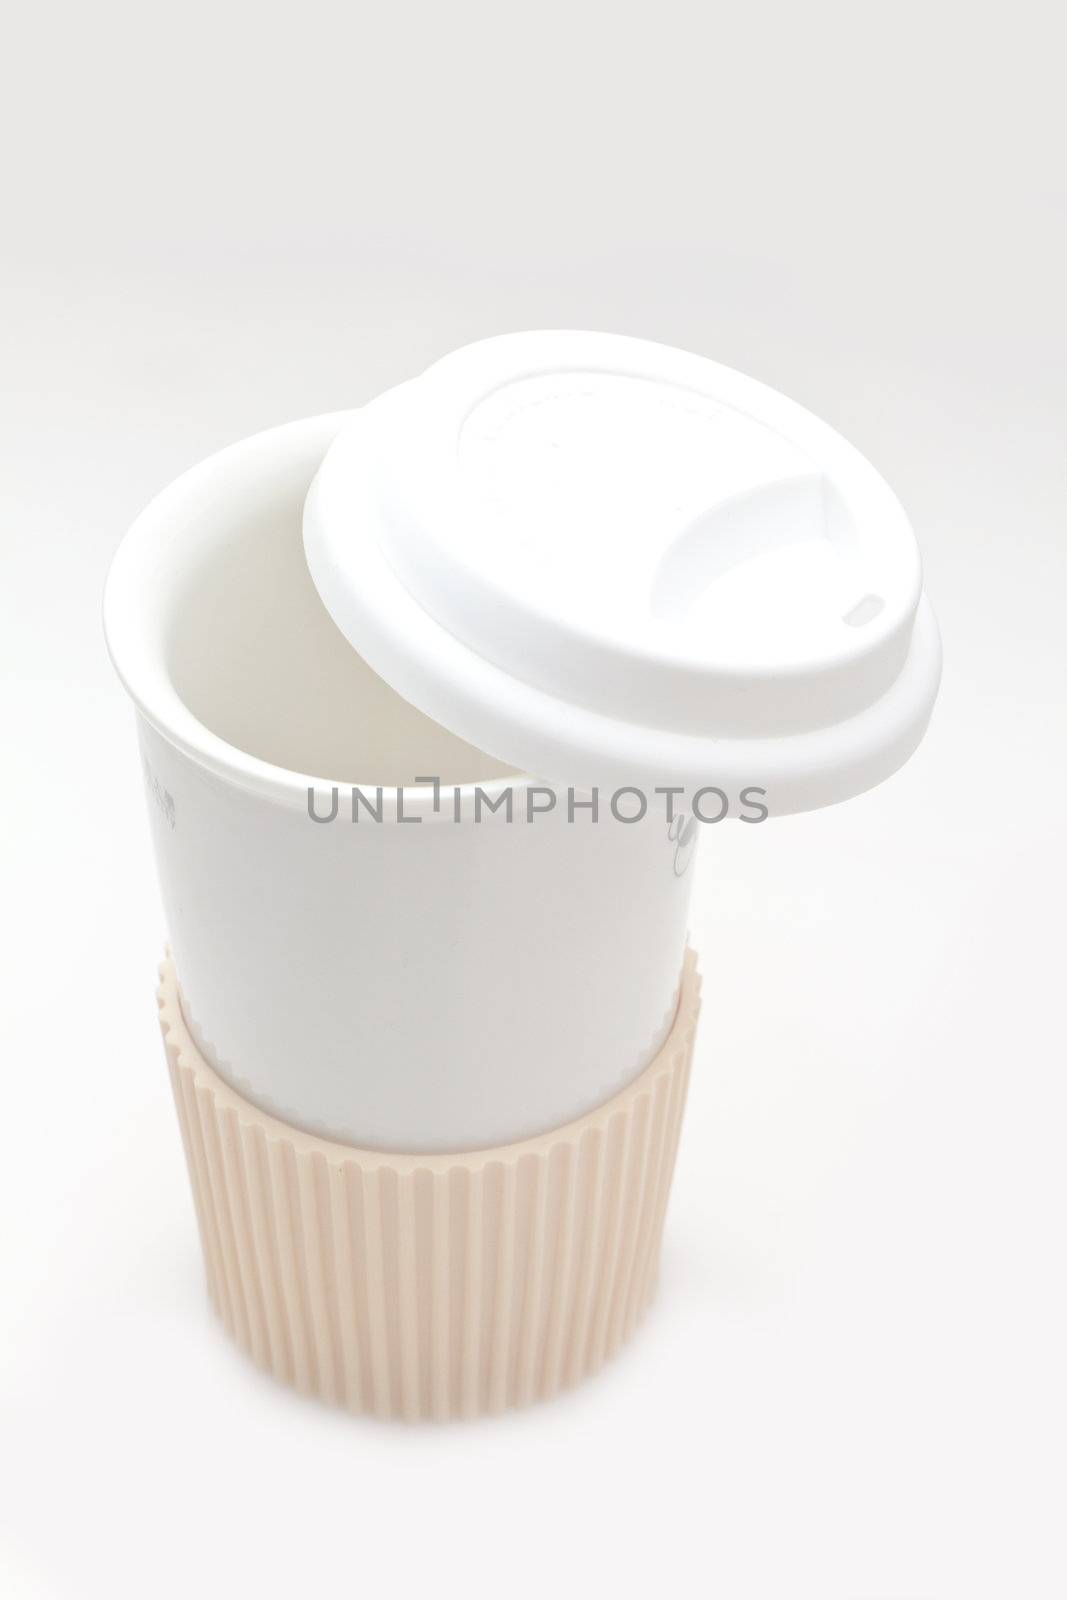 White cup isolated on white background